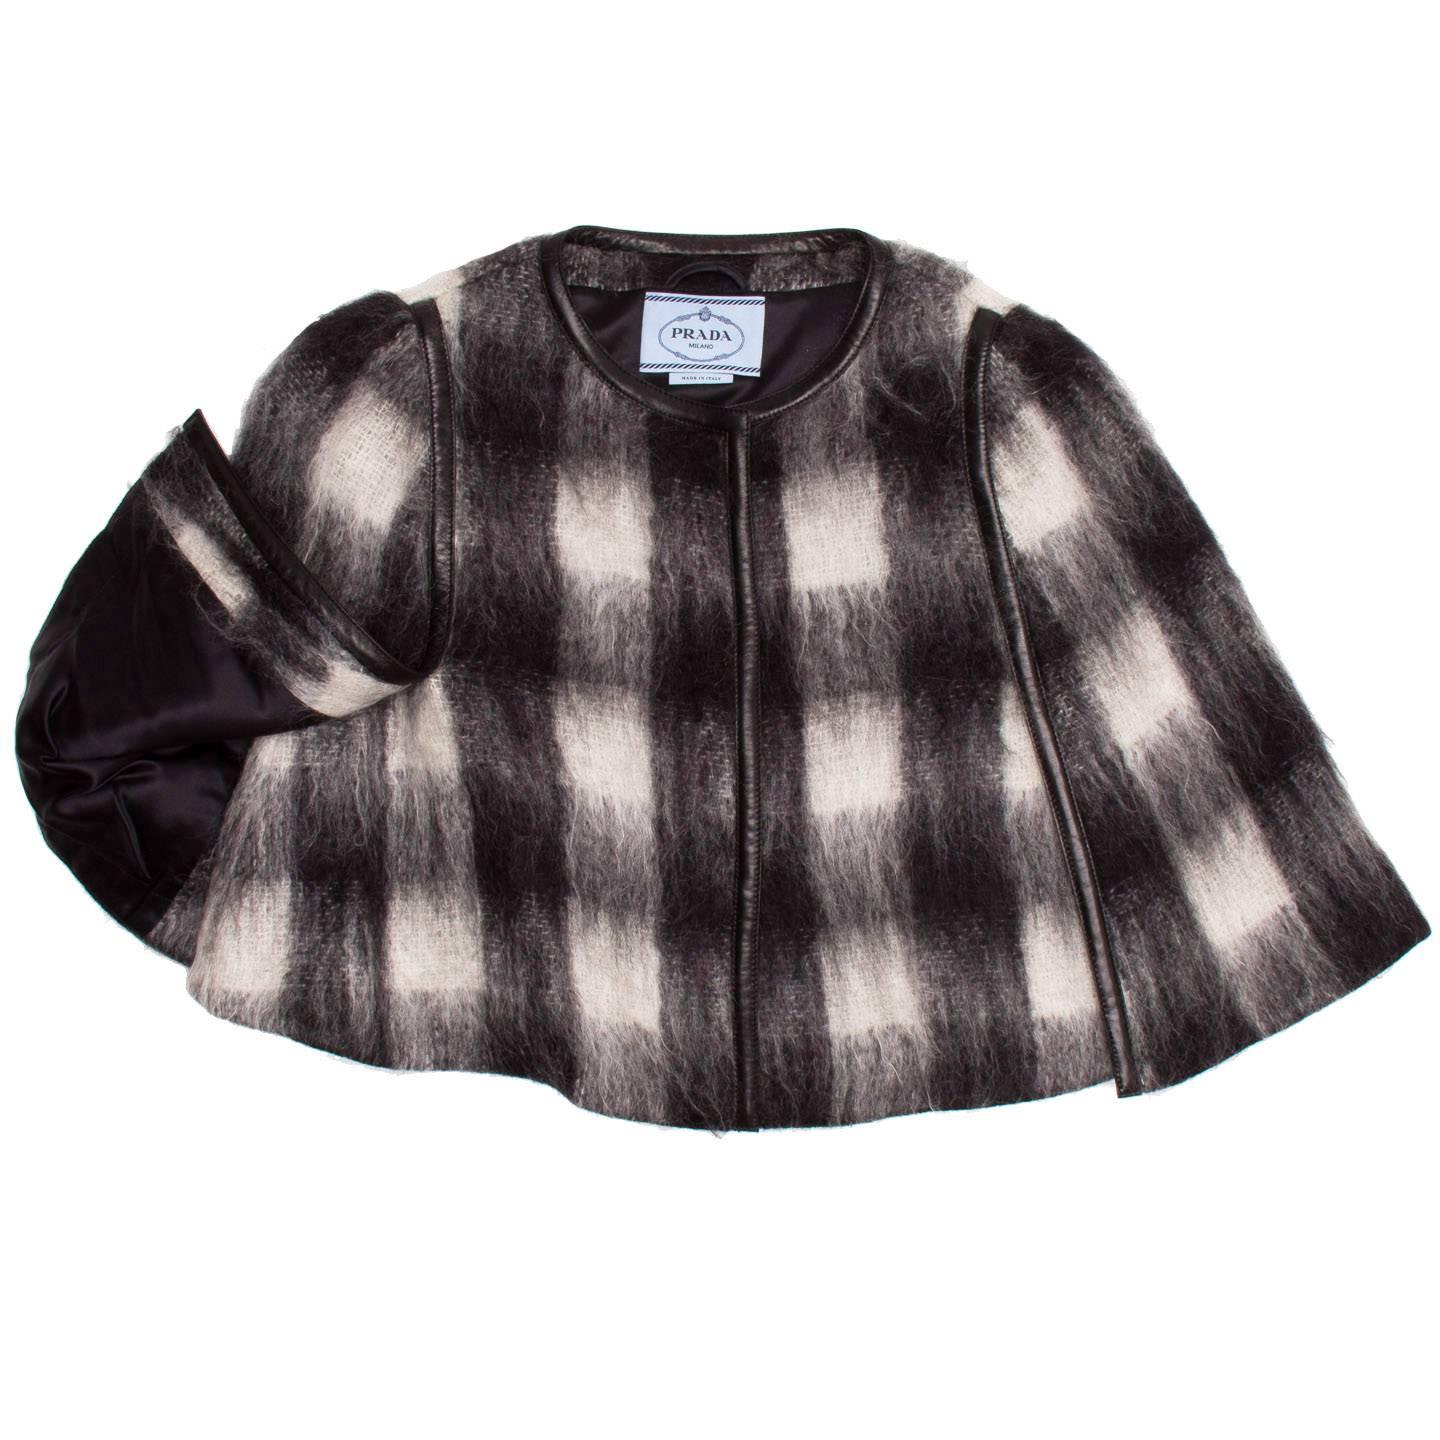 Prada Black & White Mohair Caplet In Excellent Condition For Sale In Brooklyn, NY